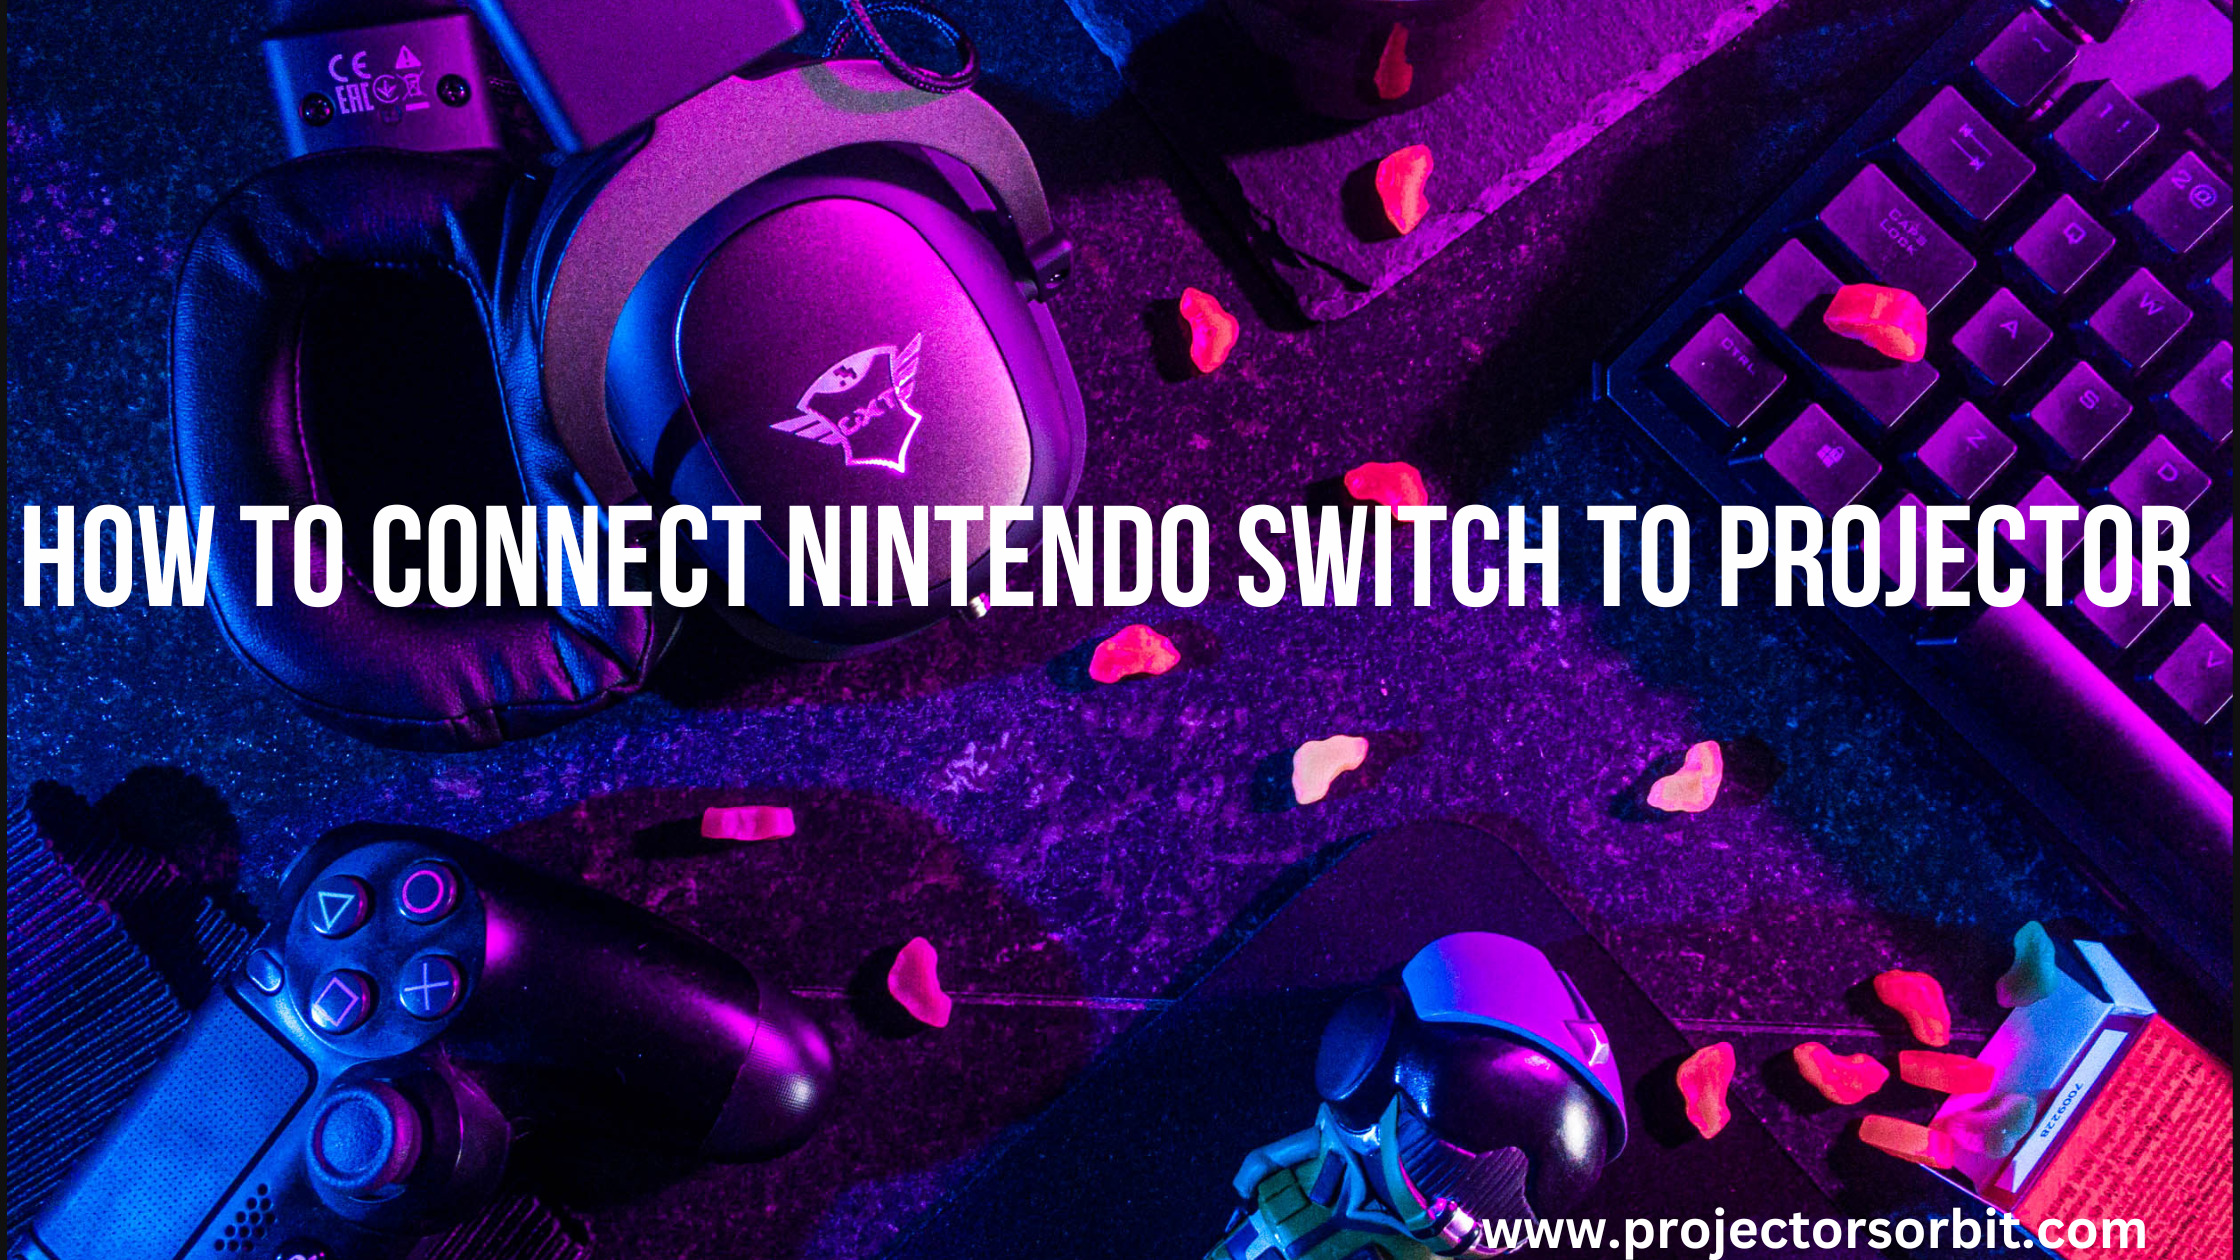 how to connect Nintendo switch to projector